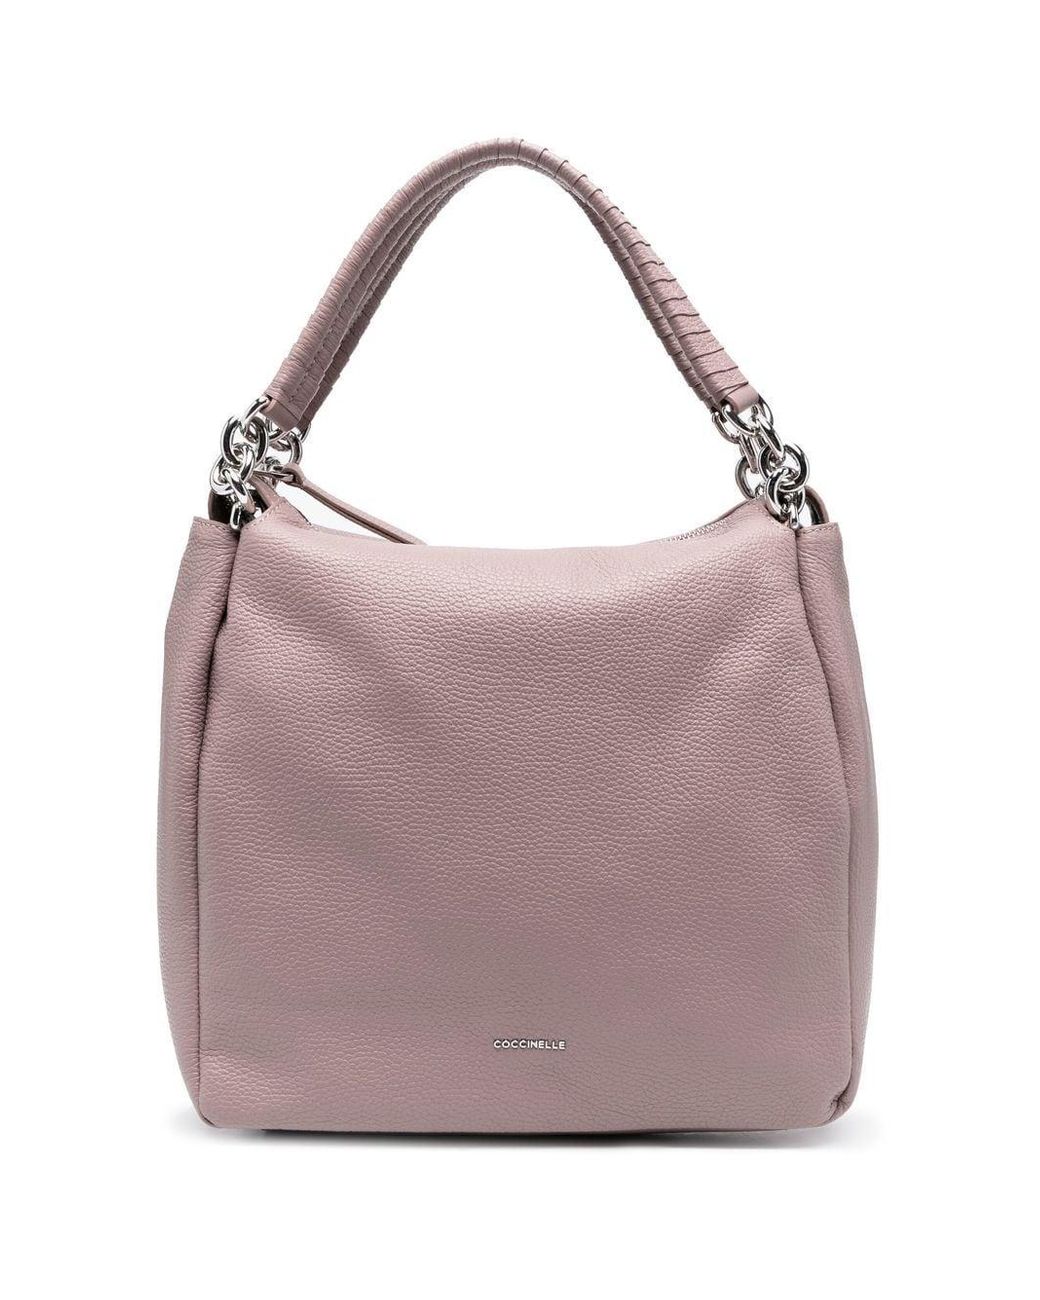 Coccinelle Maelody Leather Tote Bag in Pink | Lyst